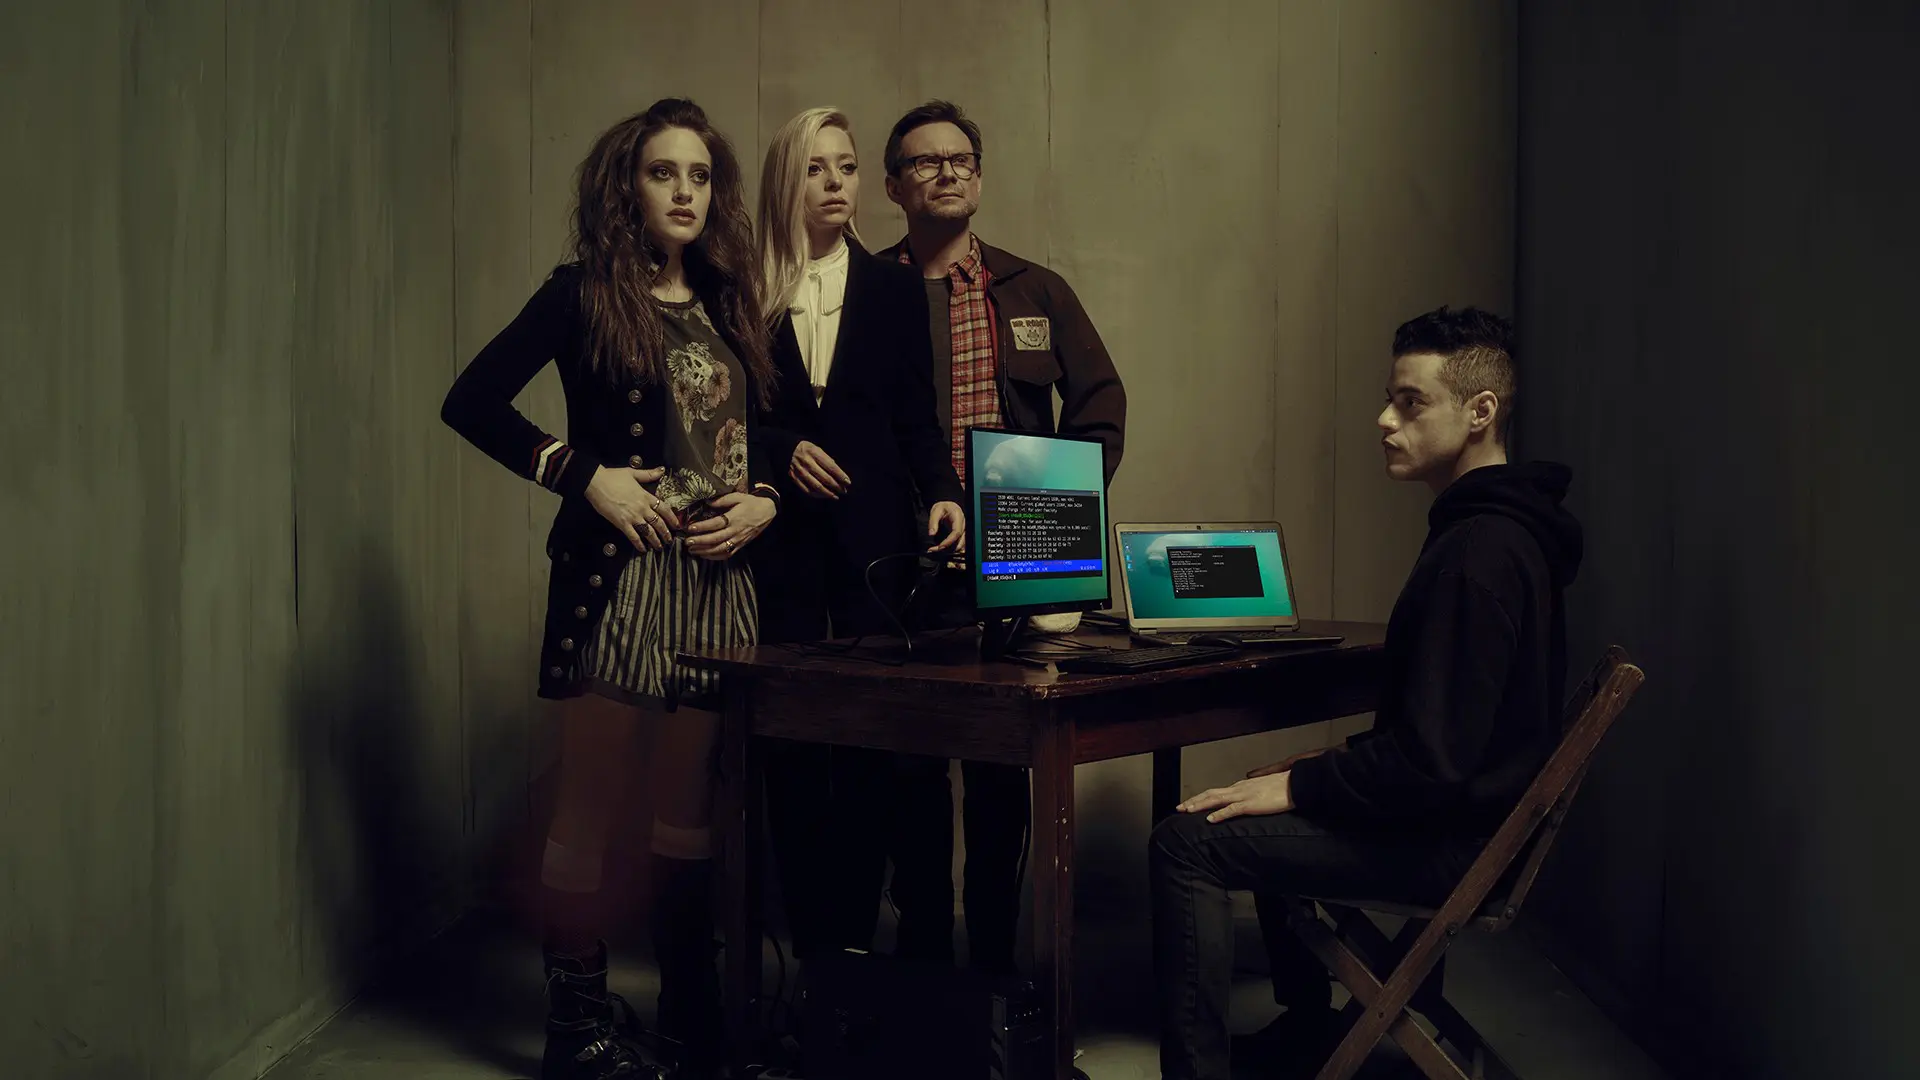 Mr. Robot' Season 4 Premiere Down After Two-Year Absence – Deadline